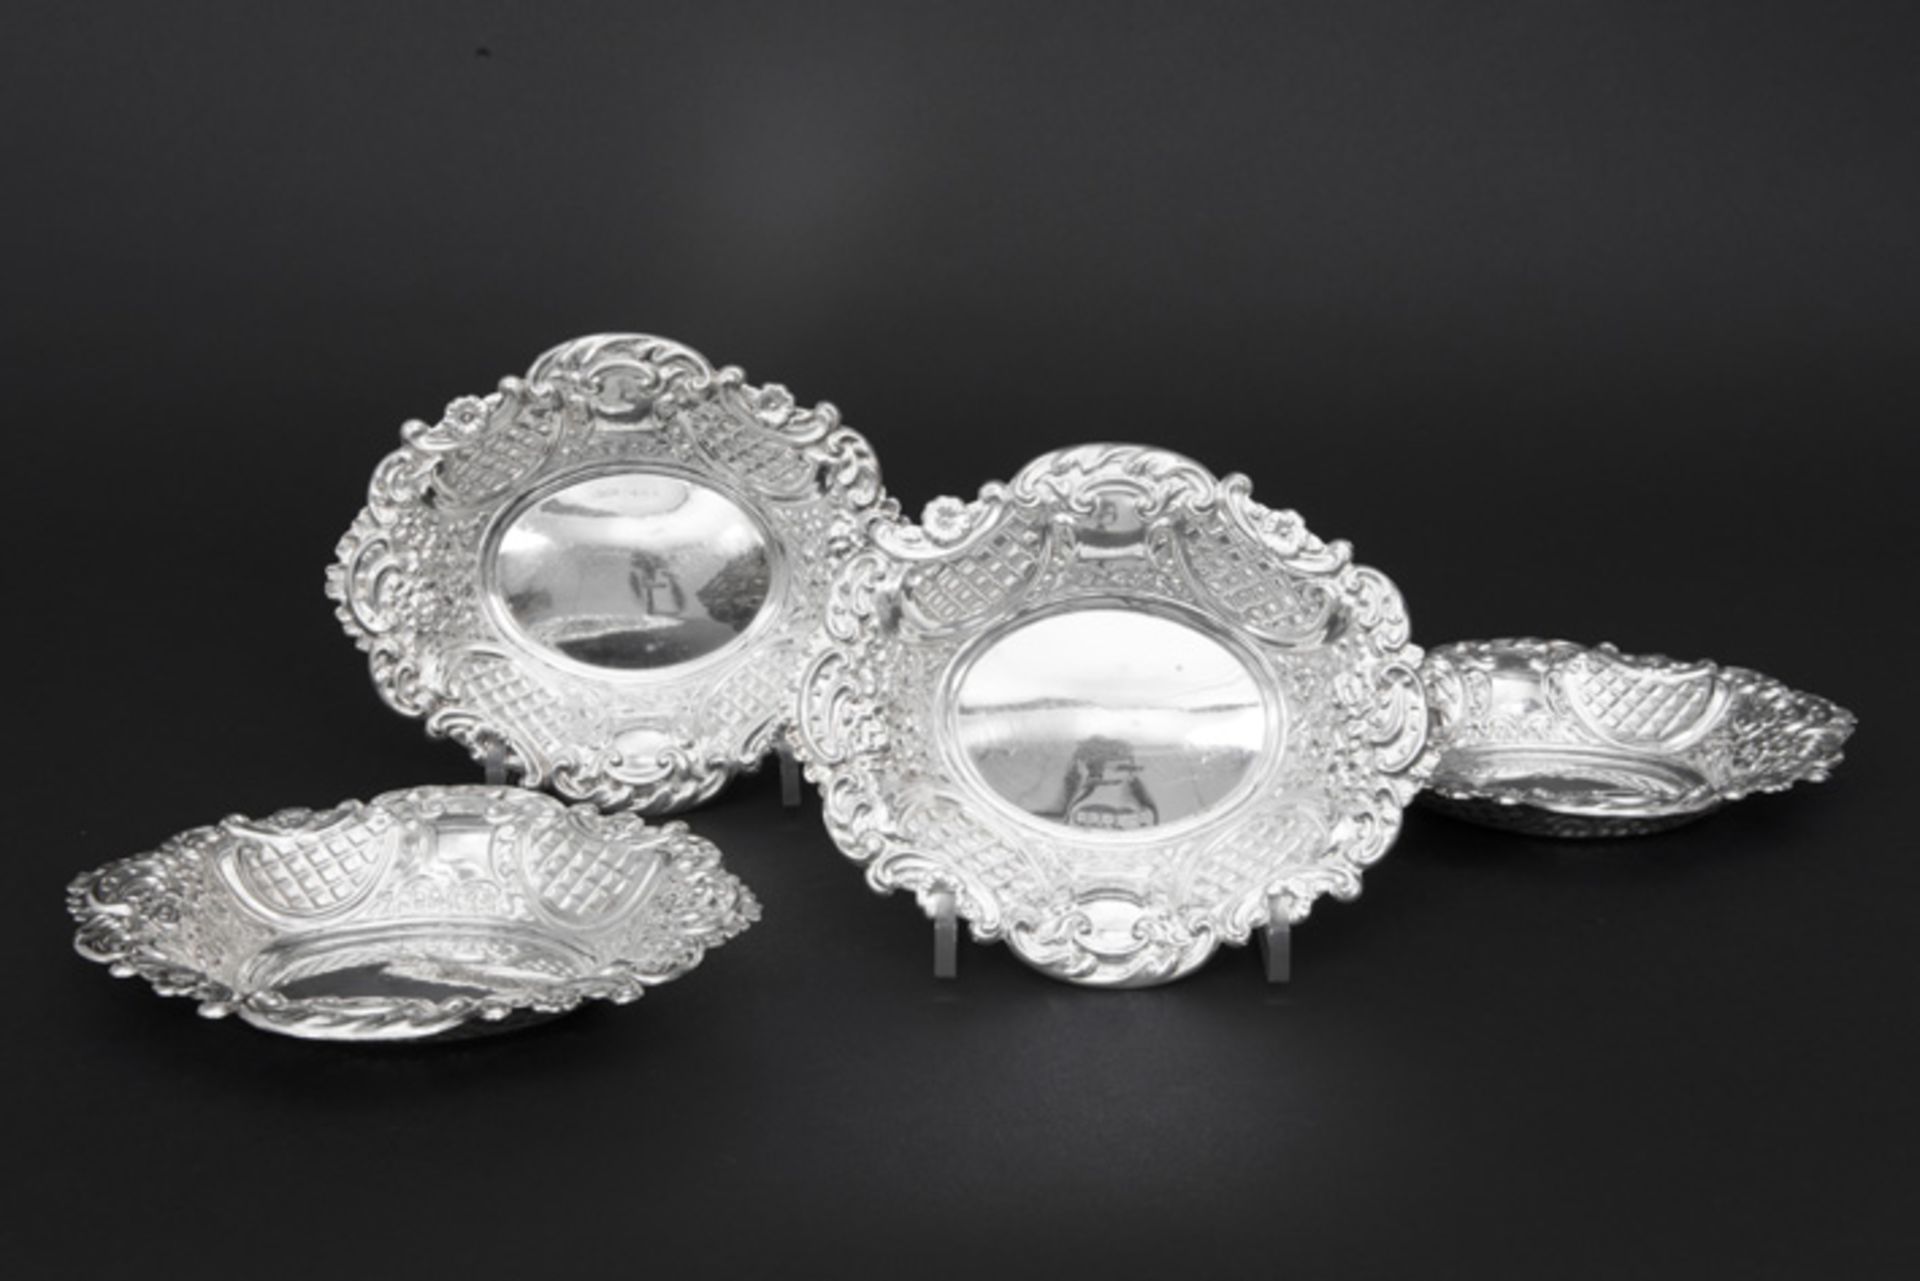 set of four English sweet's baskets in marked and "A. Taile & Sons" signed silver || A. TAILE & SONS - Image 2 of 3